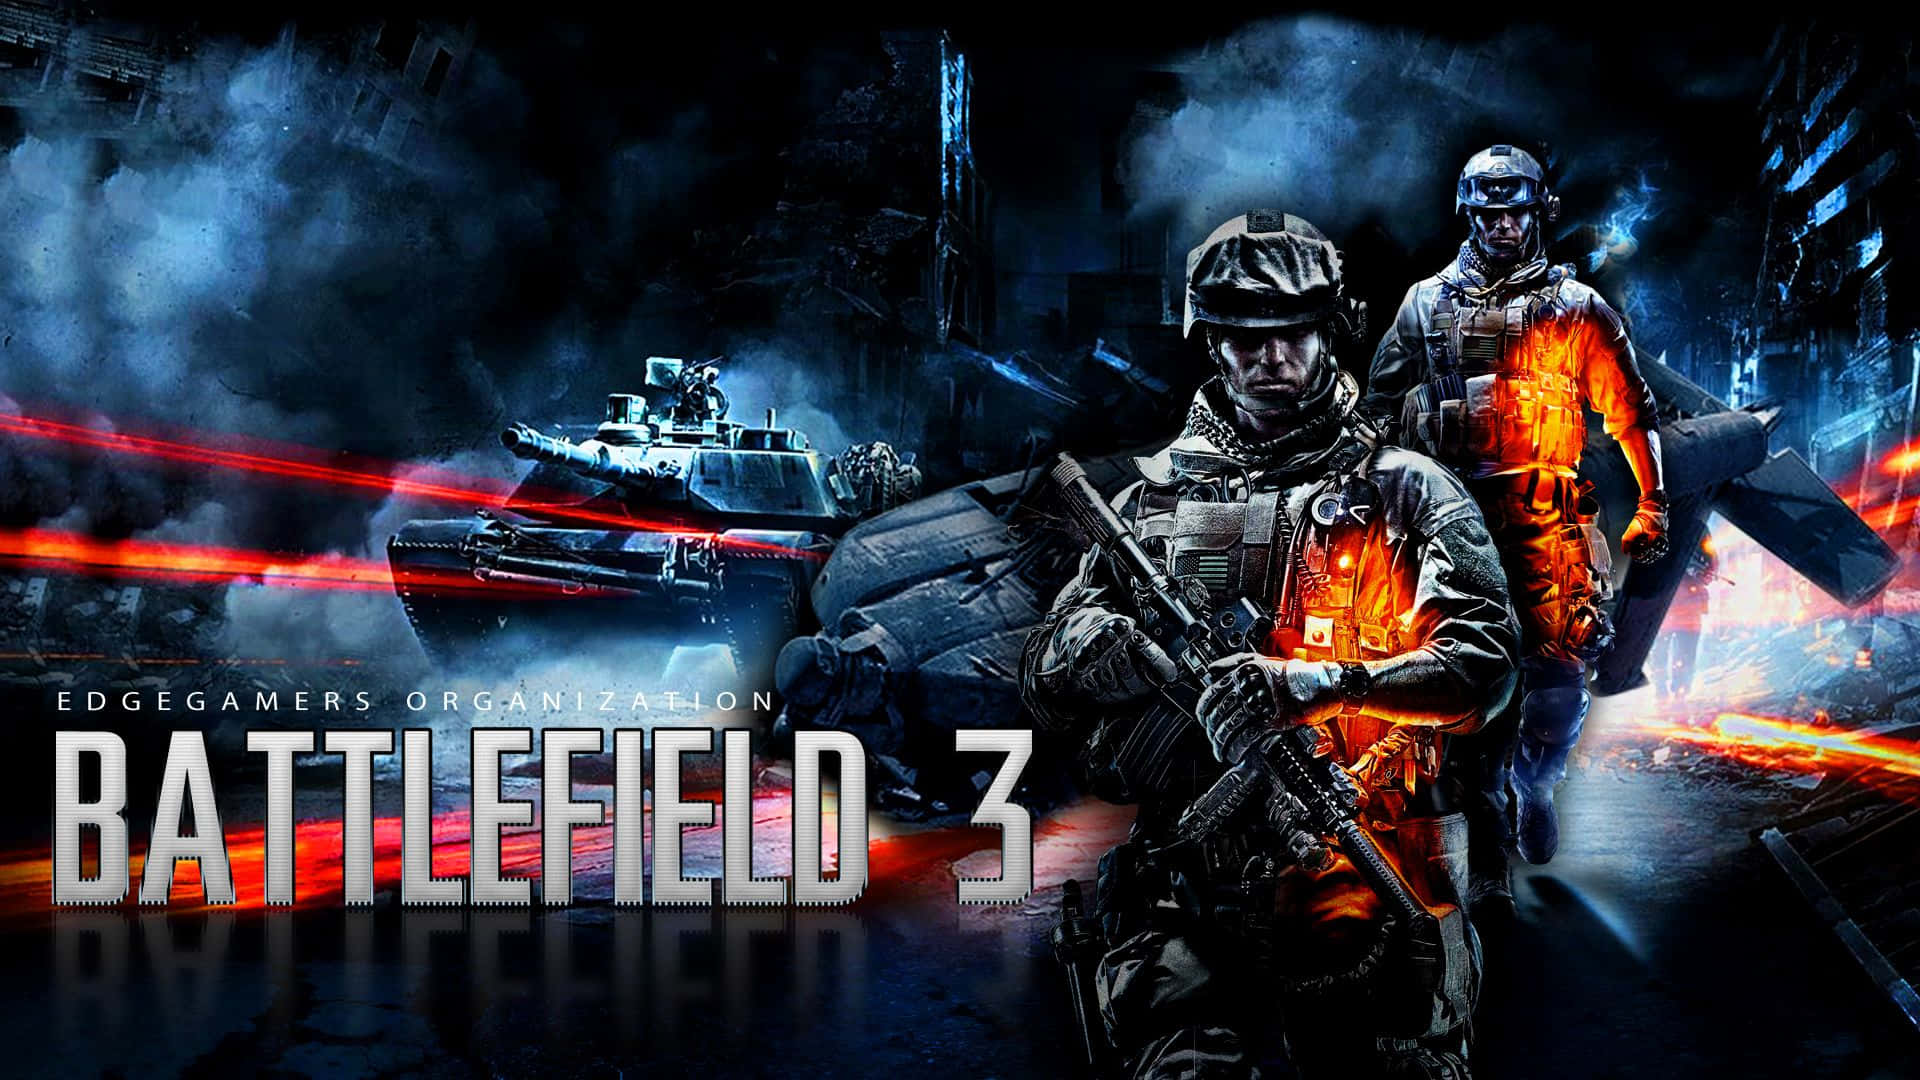 Join the battlefield from your gaming chair in Battlefield 3